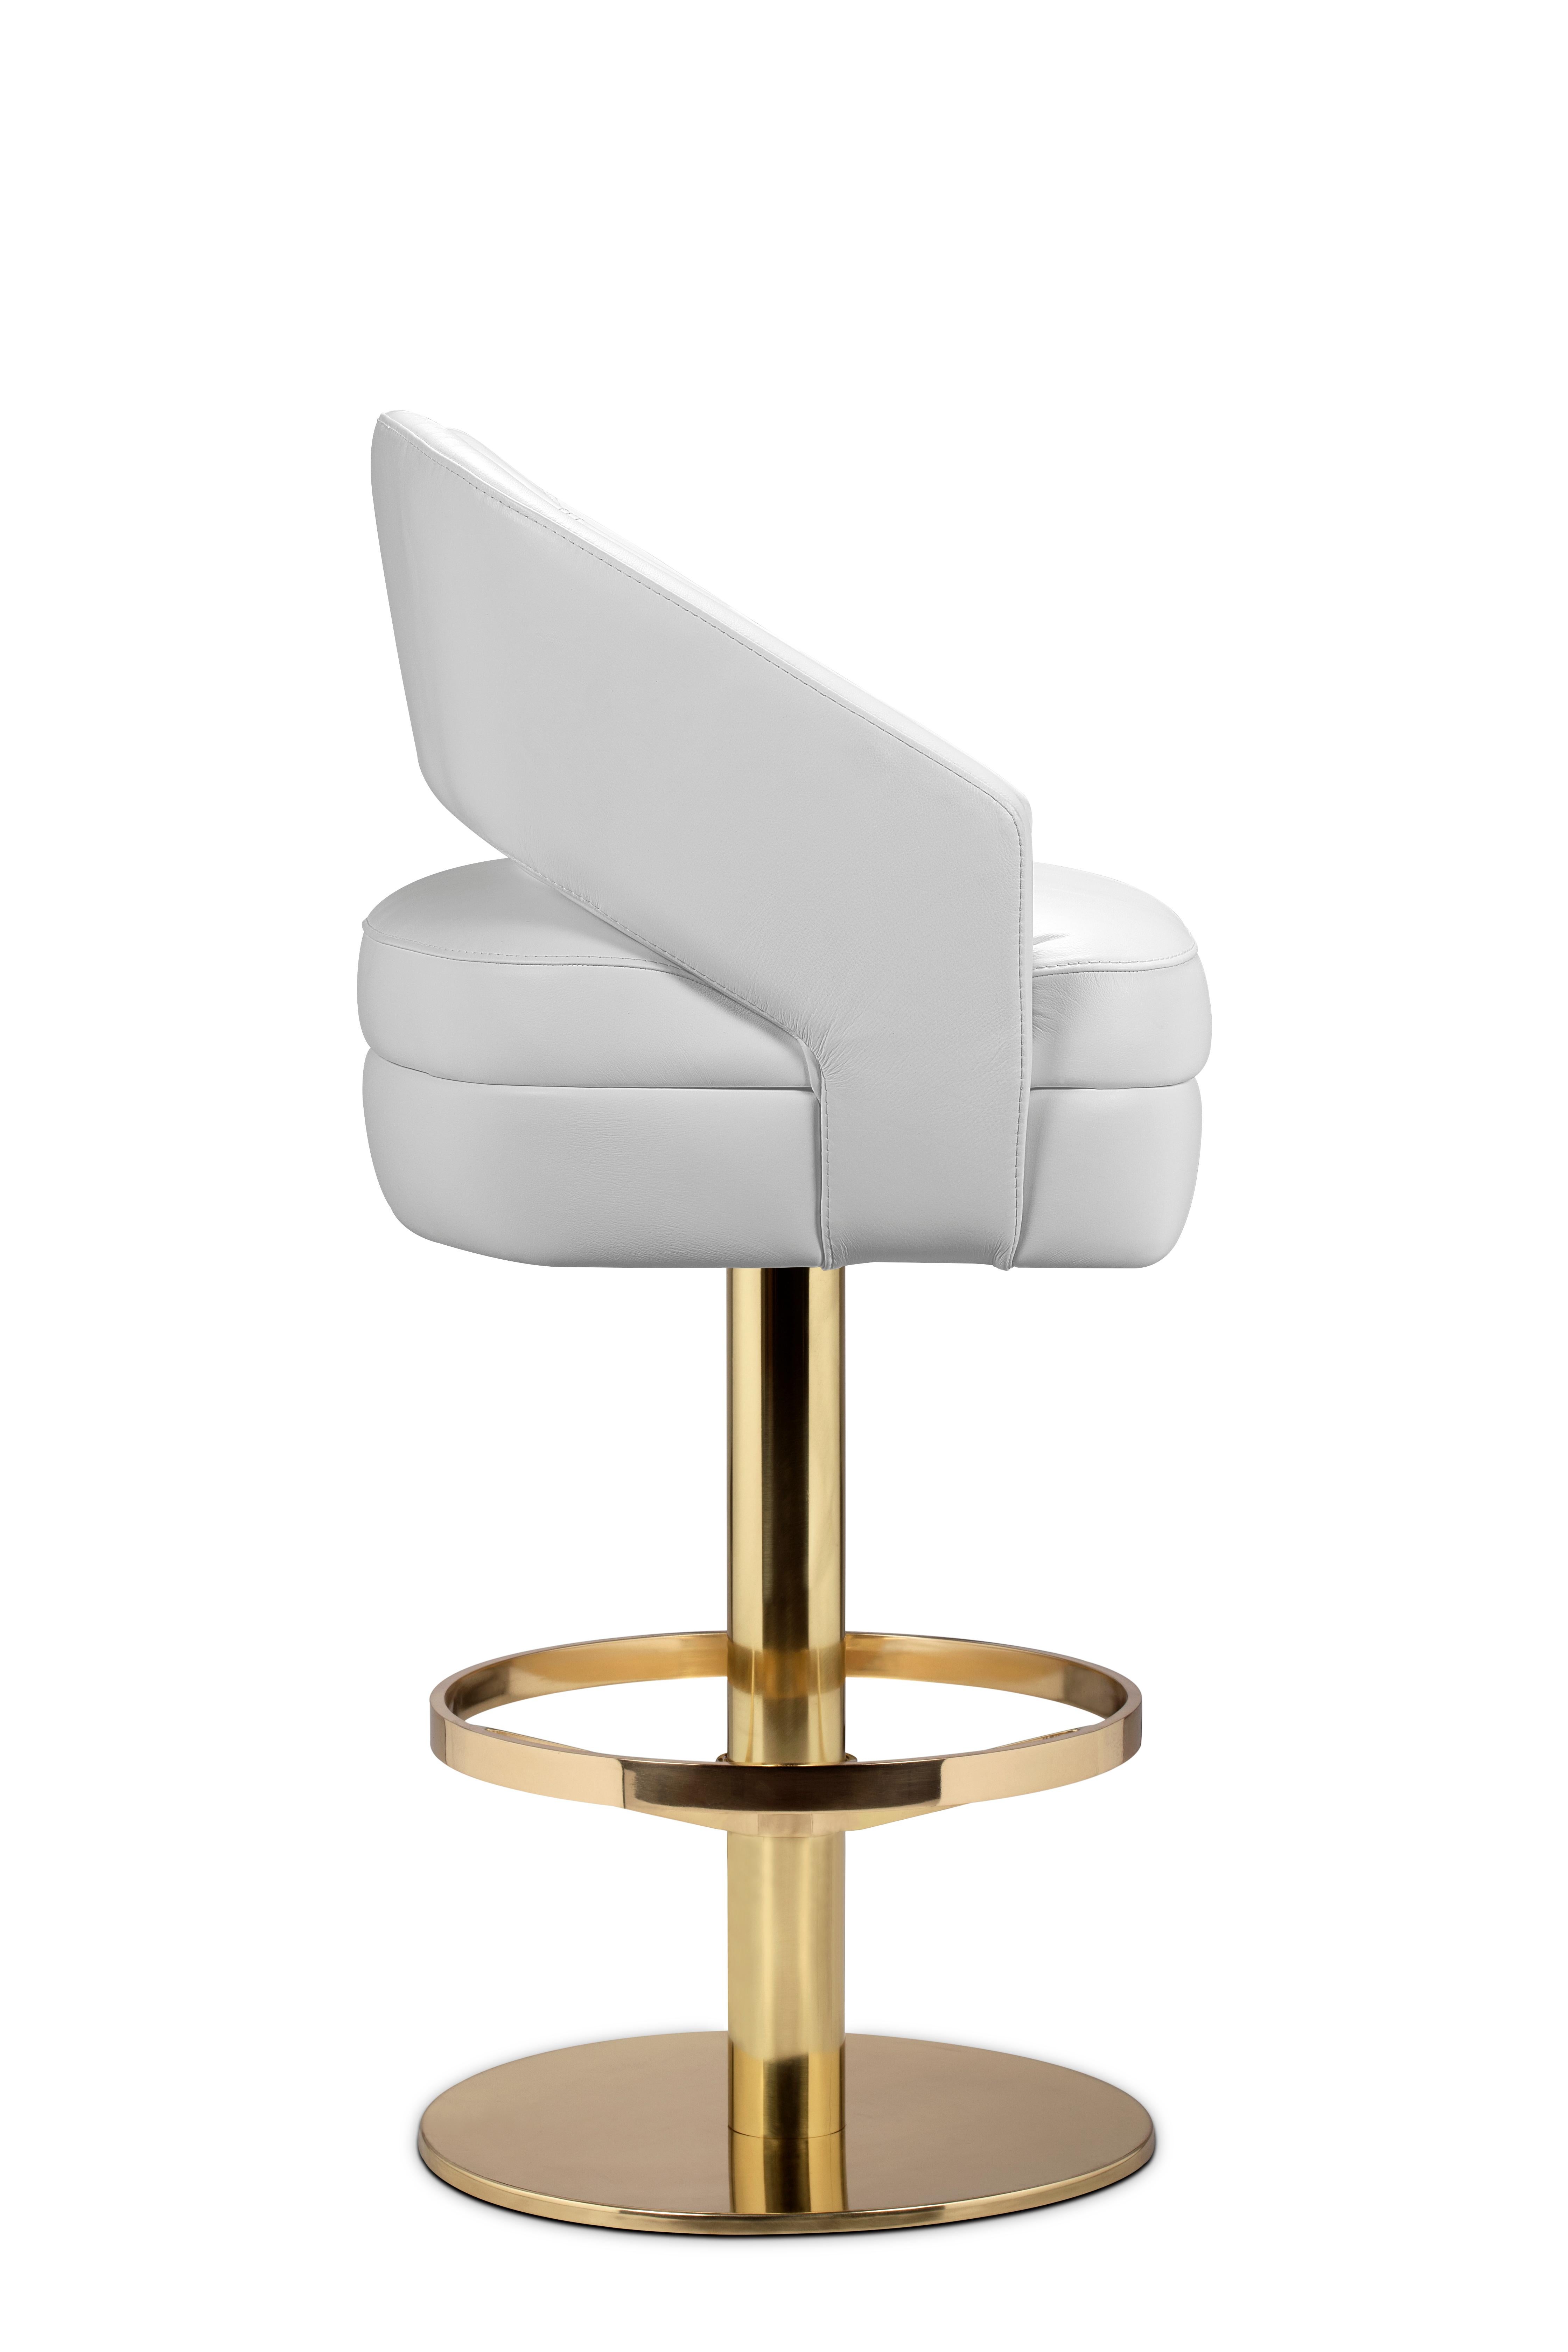 Russel bar chair delve into space age aesthetics, being produced in creamy velvet fabrics mixed with polished brass. The base is round and swivels 360 degrees, providing comfort through the foot rail. Adorn your living room with a sophisticated